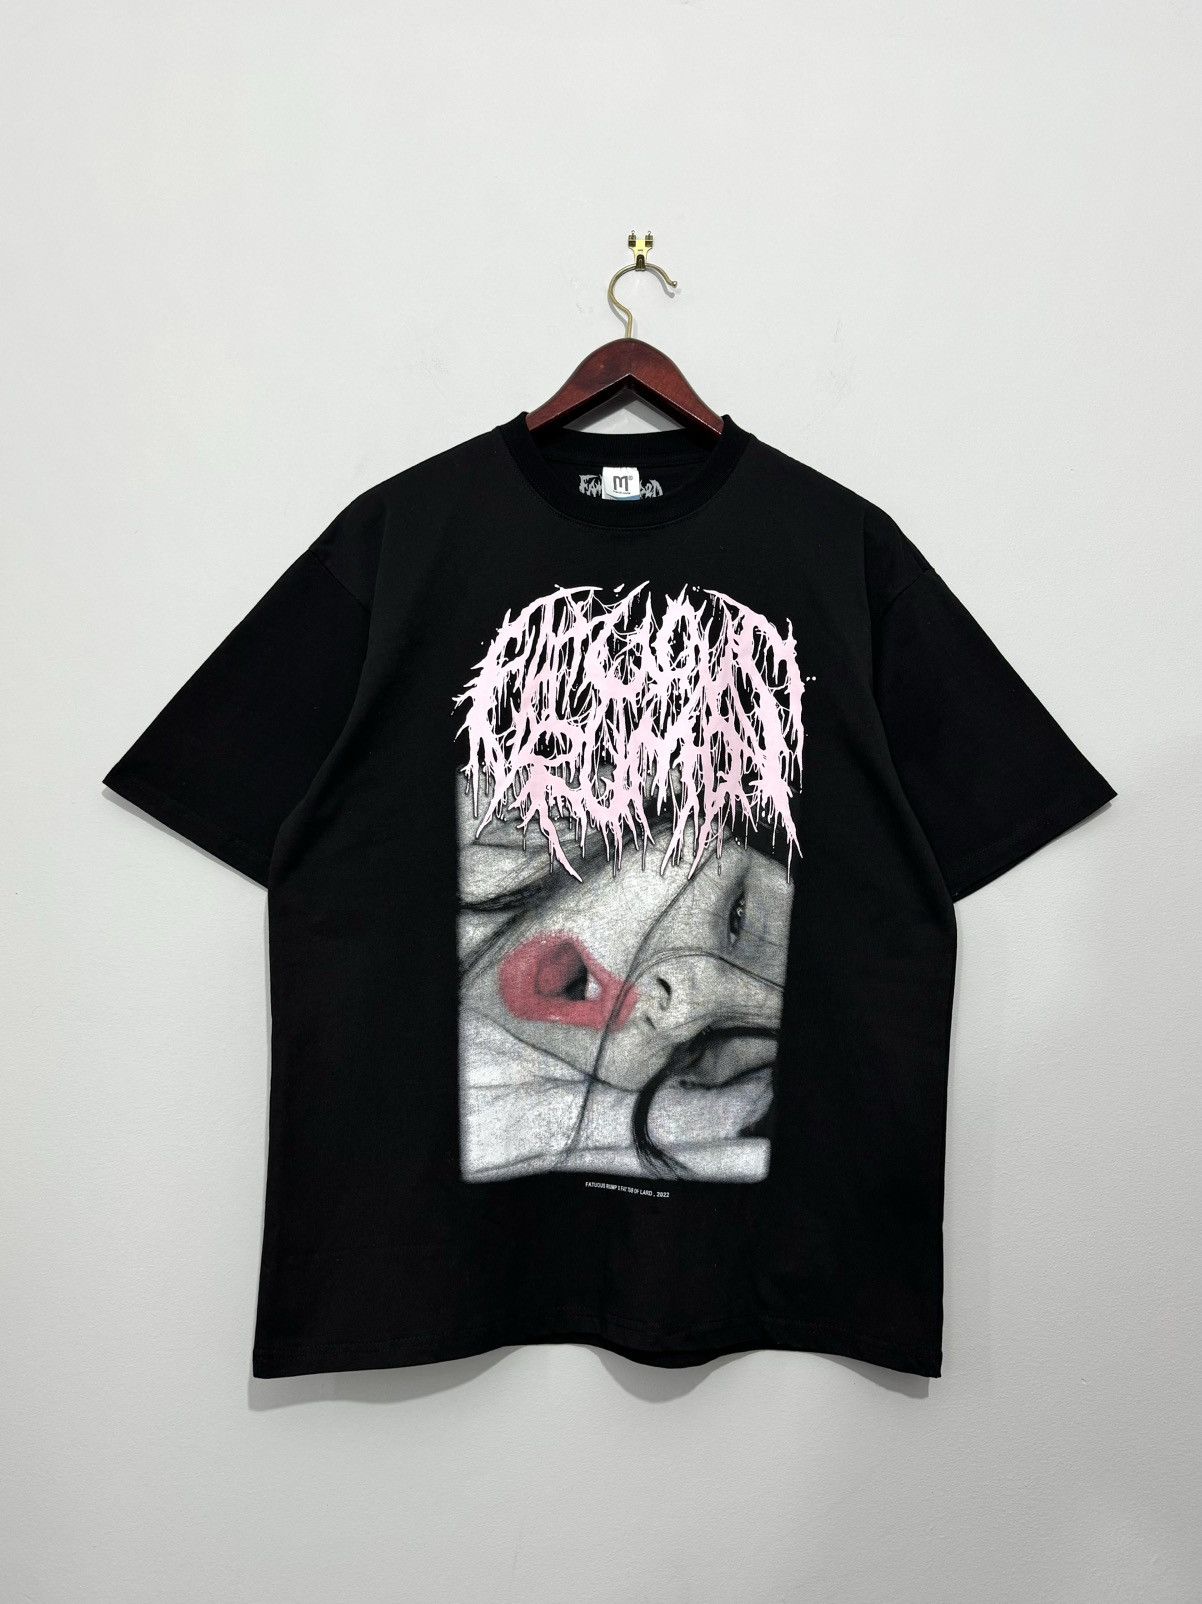 Band Tees Licensed Fatuous Rump “That’s Not Sleep” T-shirt | Grailed